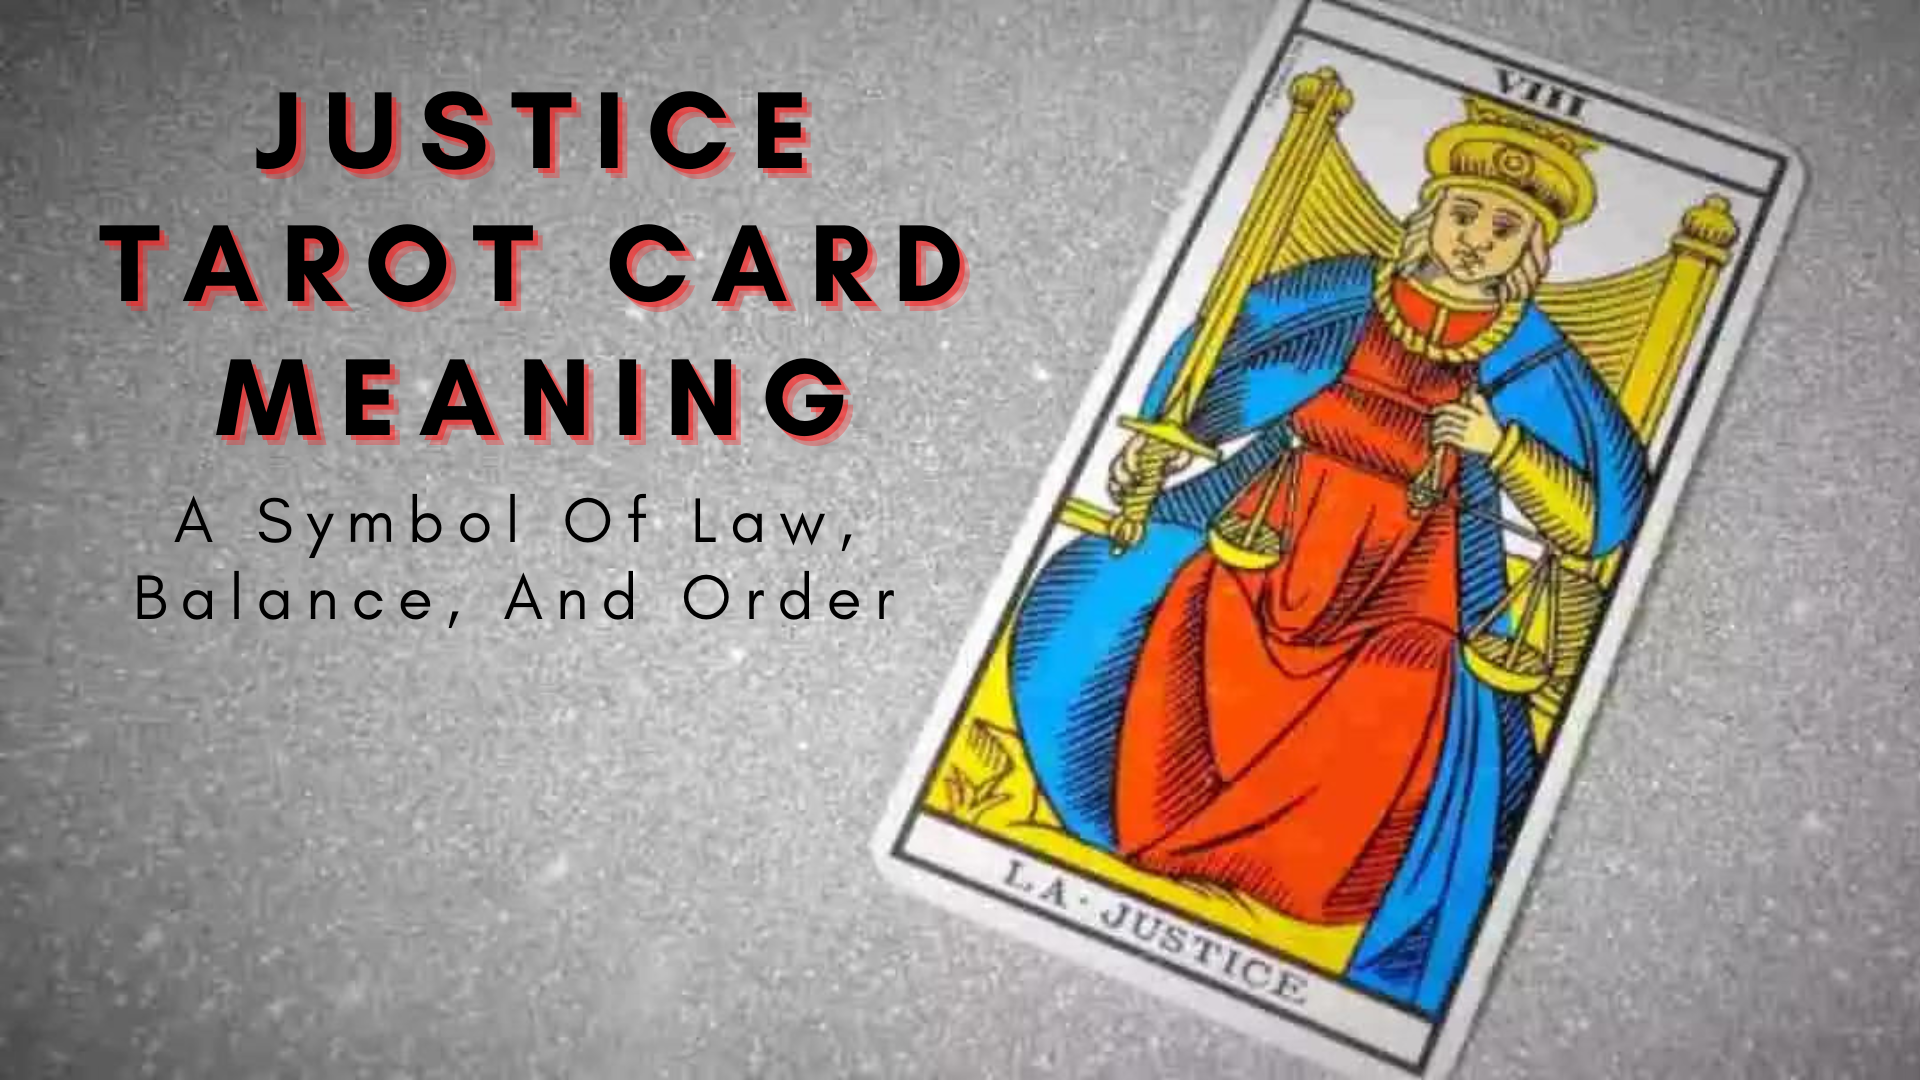 Justice Tarot Card Meaning - A Symbol Of Law, Balance, And Order